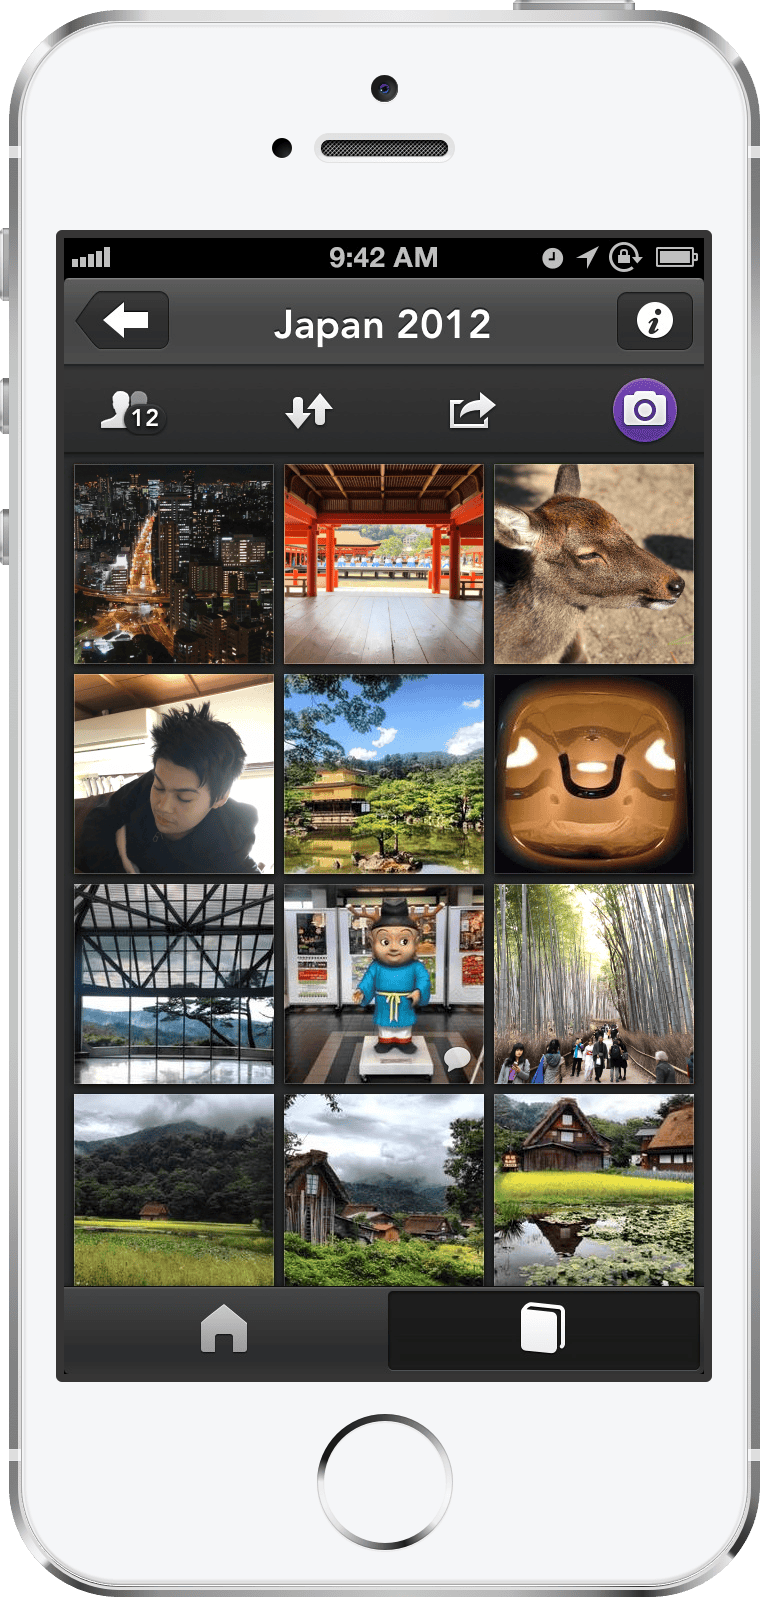 An iPhone displaying an app with a grid of 12 photos in a shared album. The user interface is dark and the photos look vibrant. A purple camera button to add more photos can be seen on a toolbar.